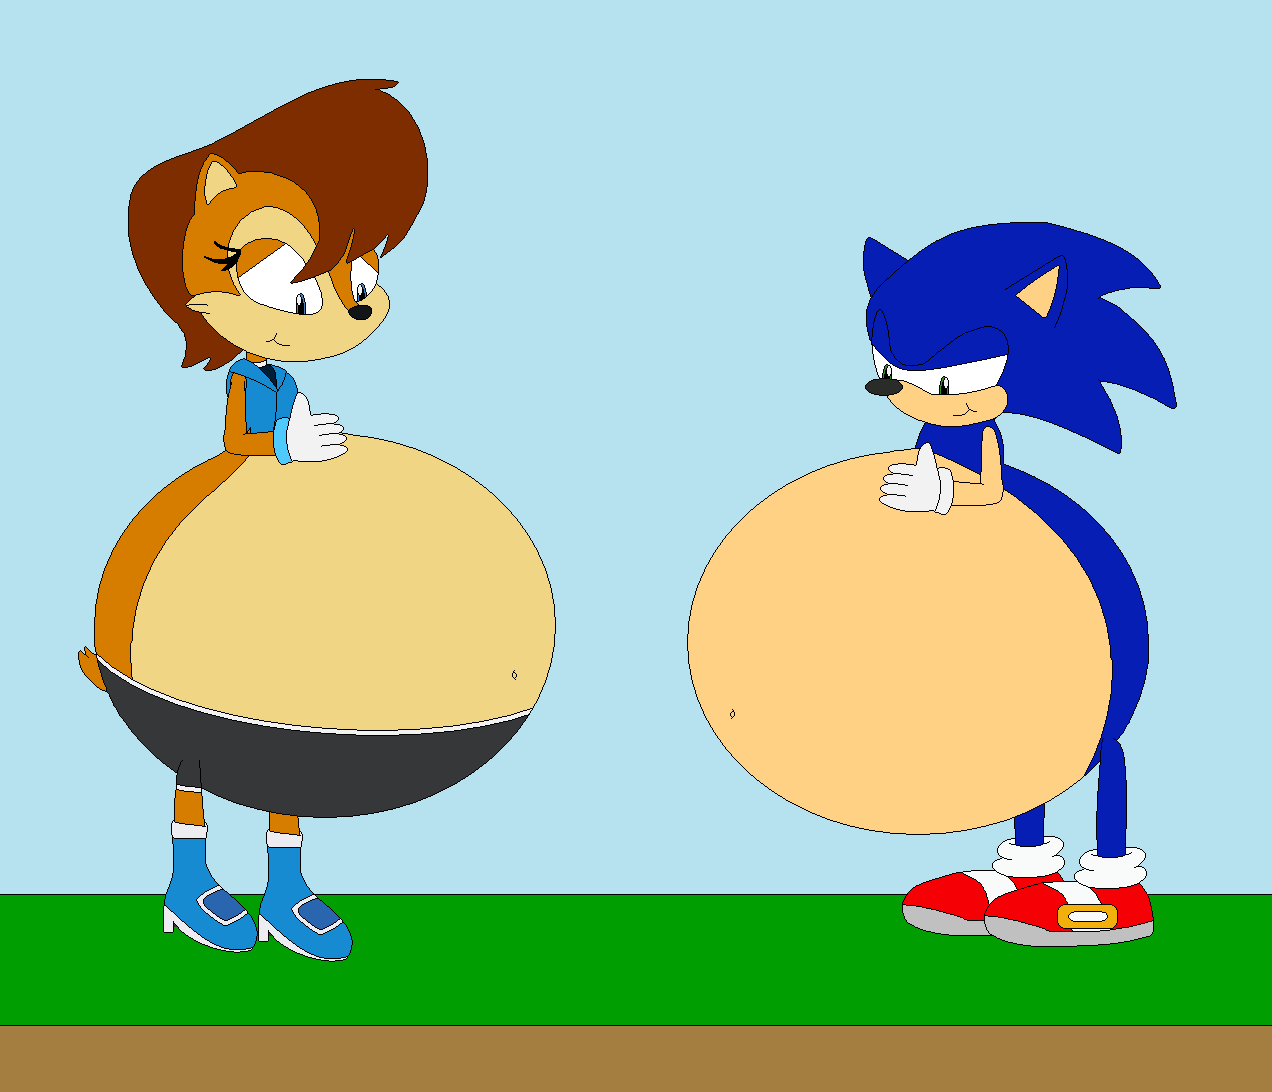 Pregnant Sonic and Sally Acorn. 